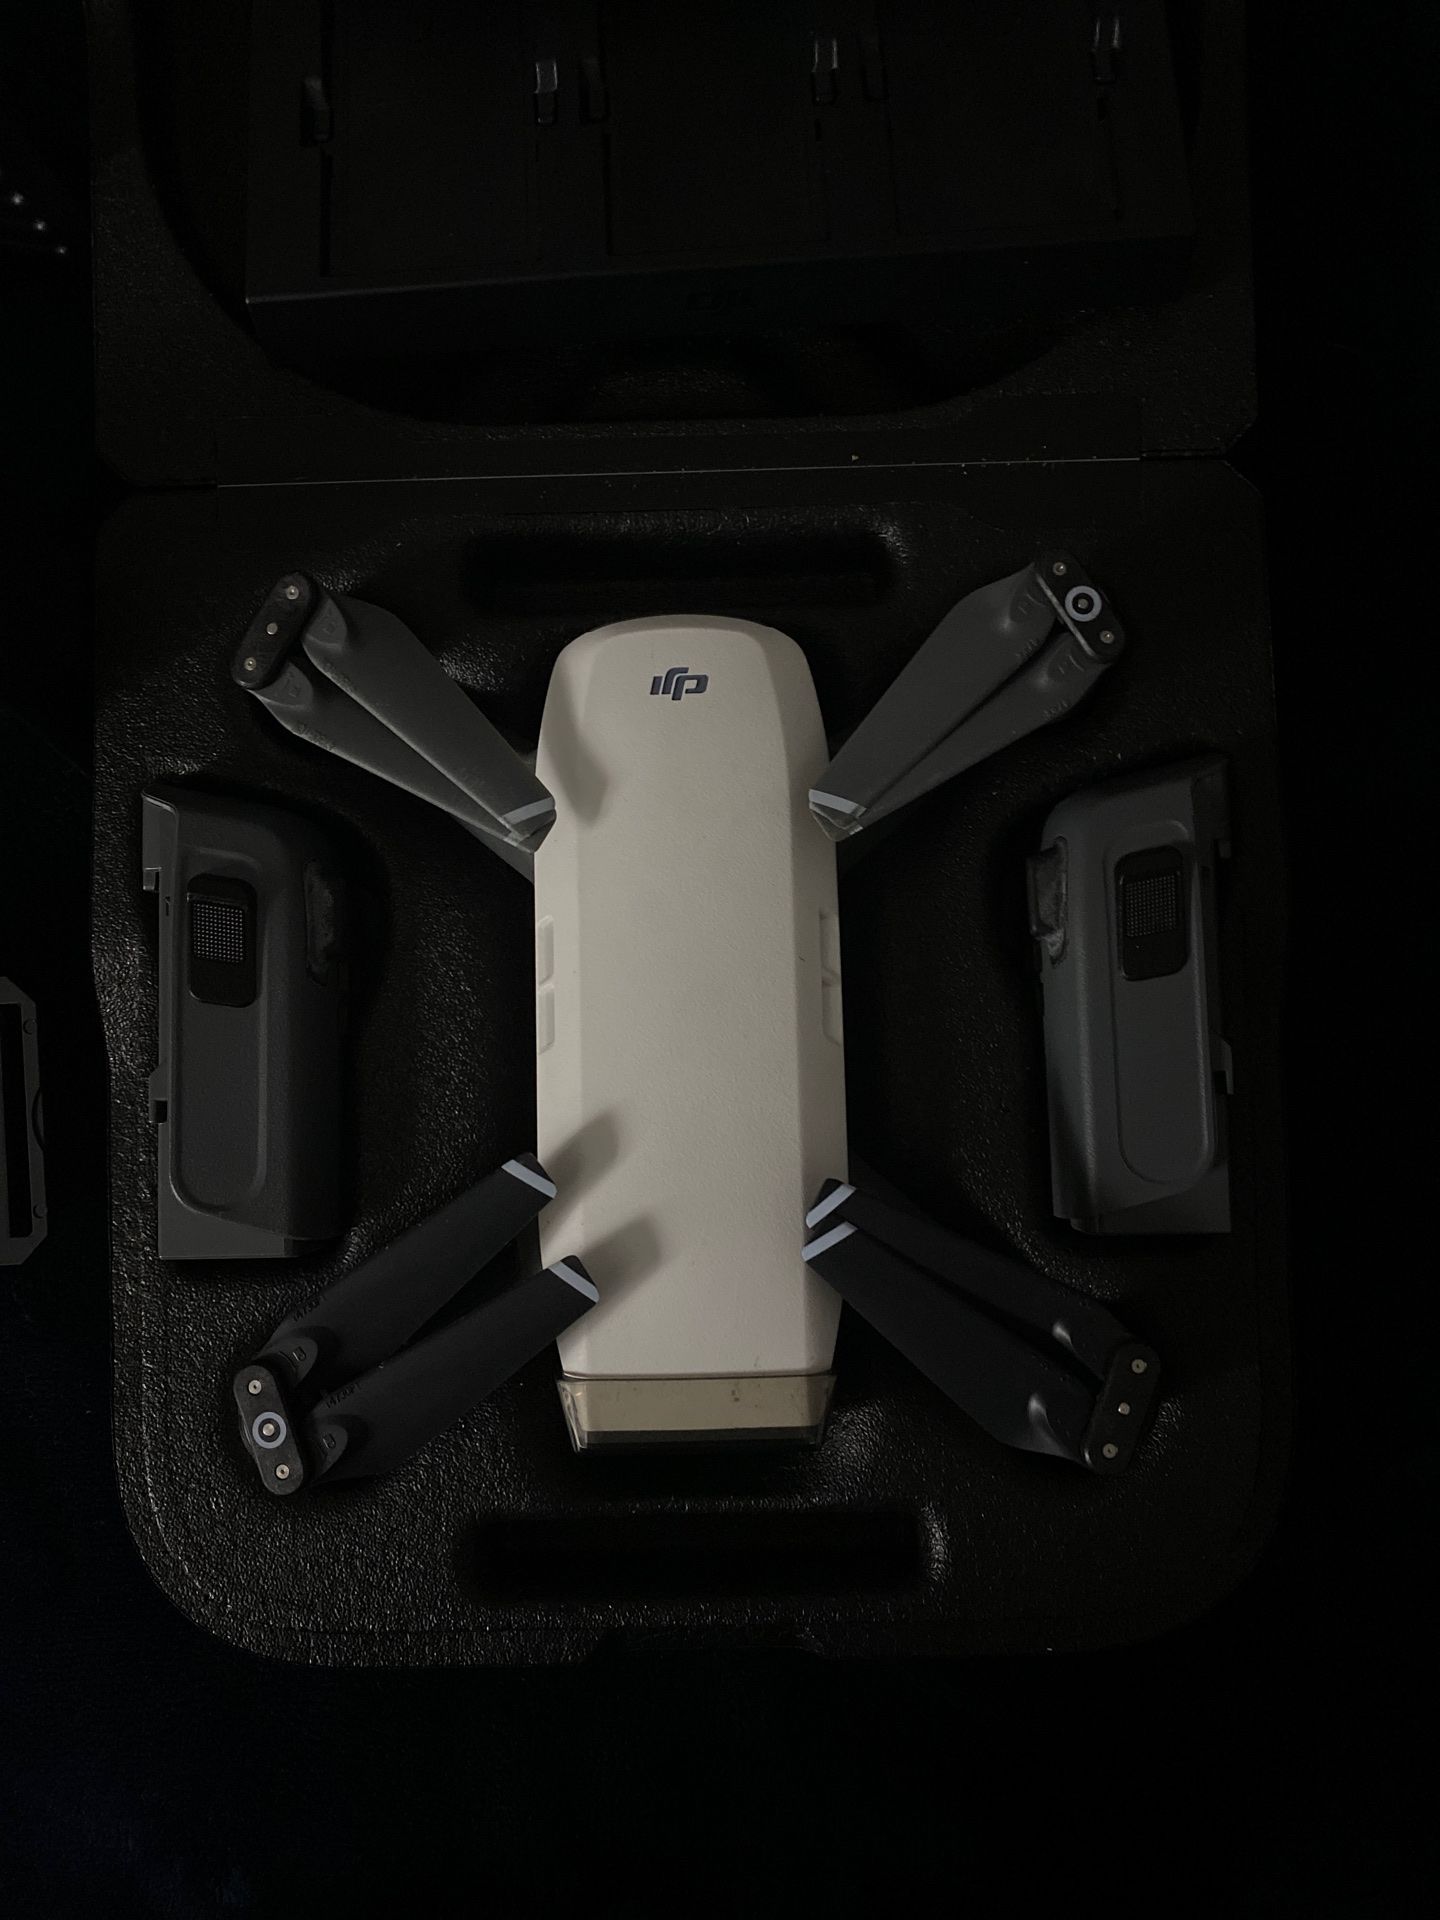 DJI SPARK fly more combo with bag and accessories